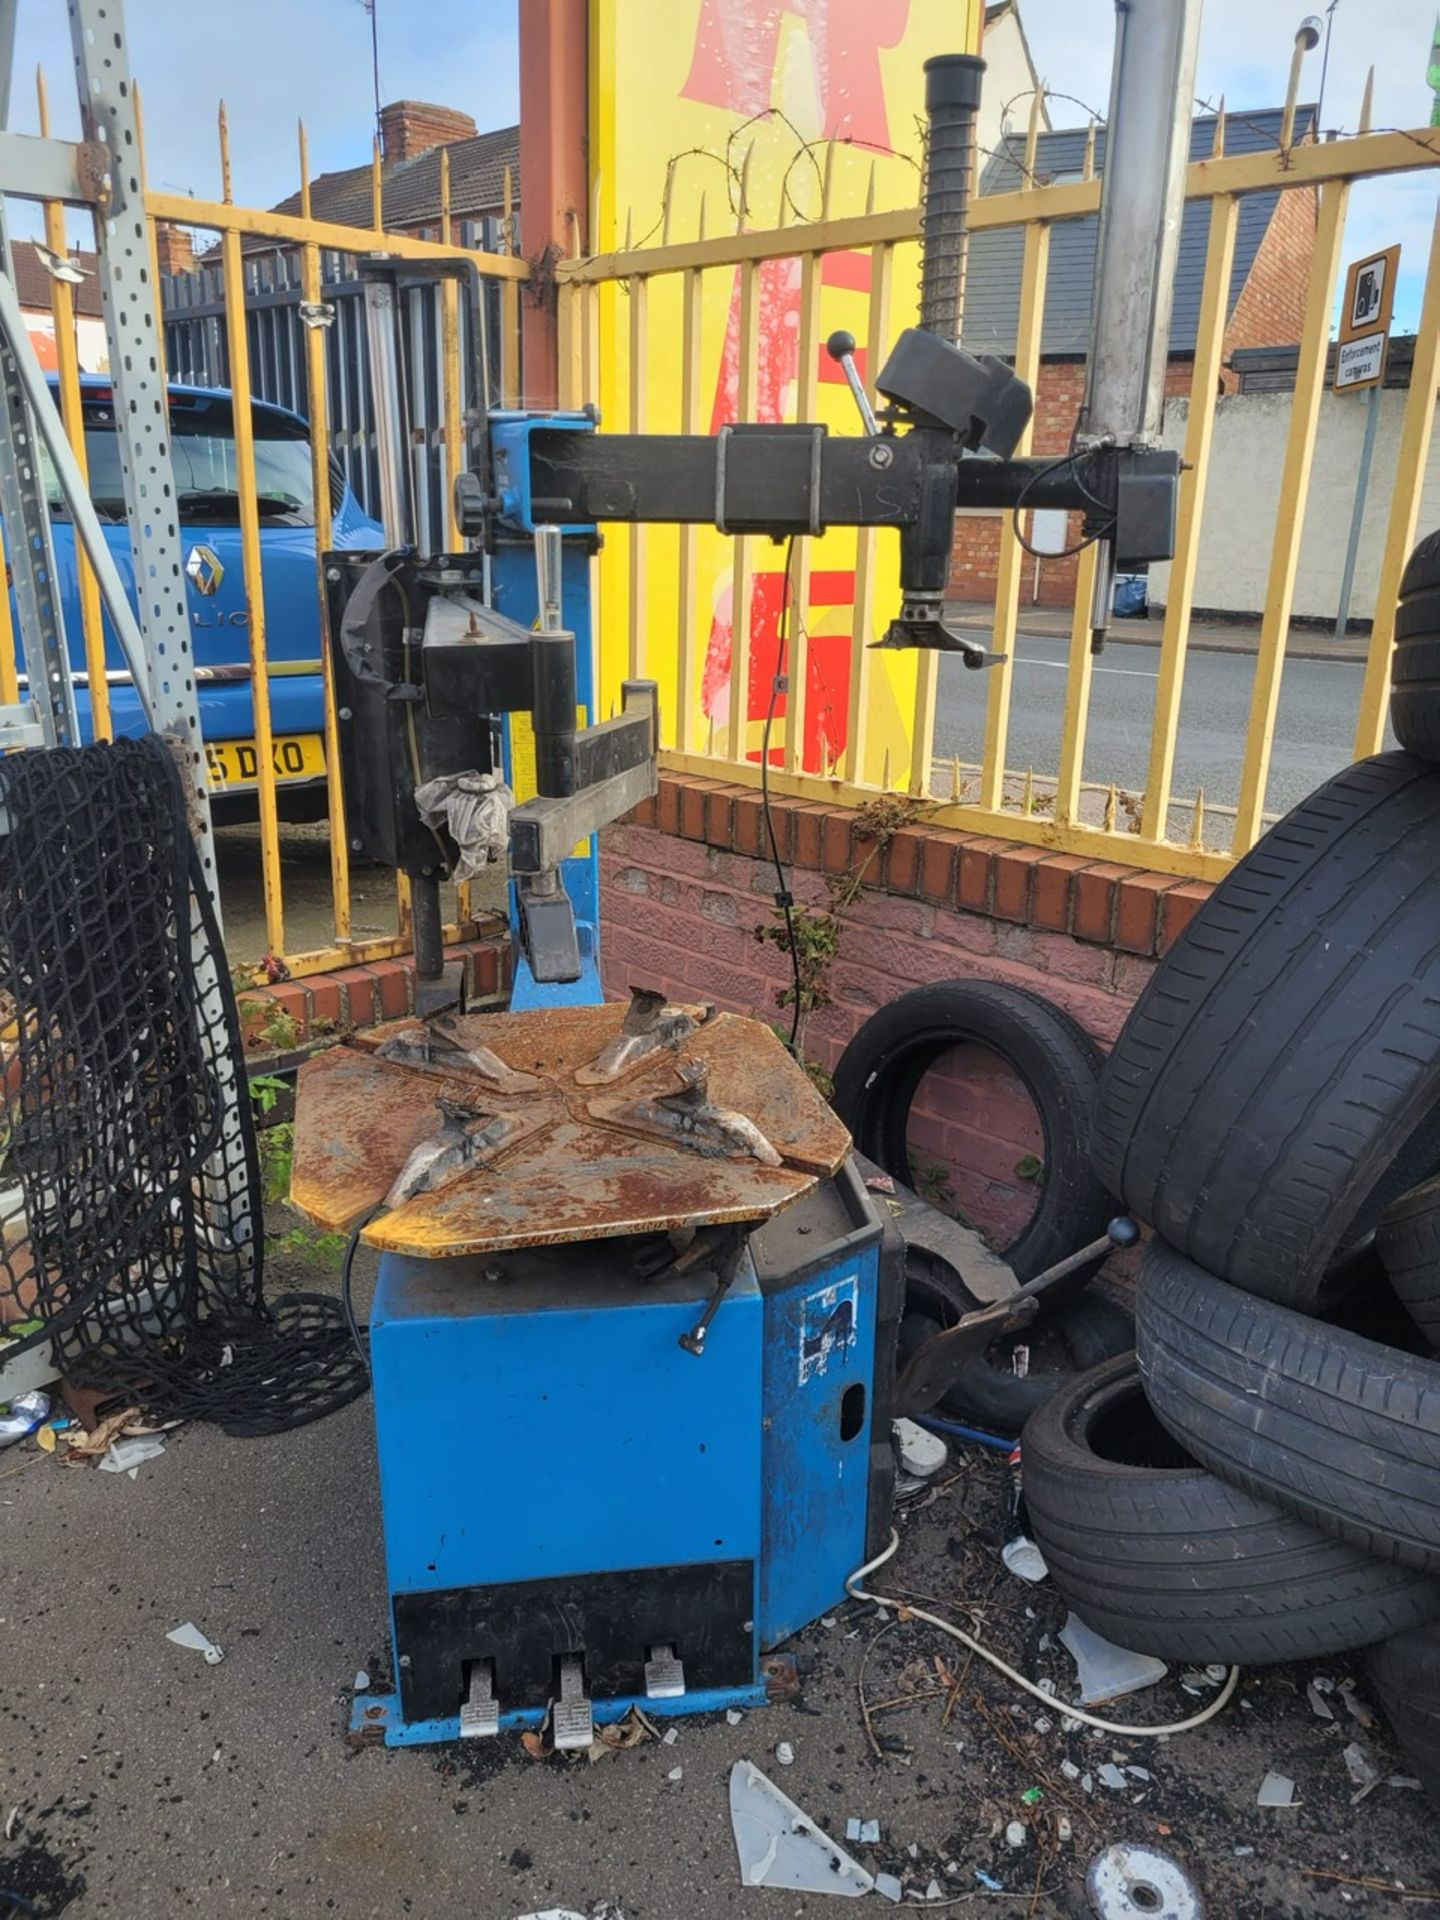 Eurotek 4ton, 4-Post Vehicle Lift, Tyre Fitting Machine (Stored Outside - For Sp - Image 5 of 6